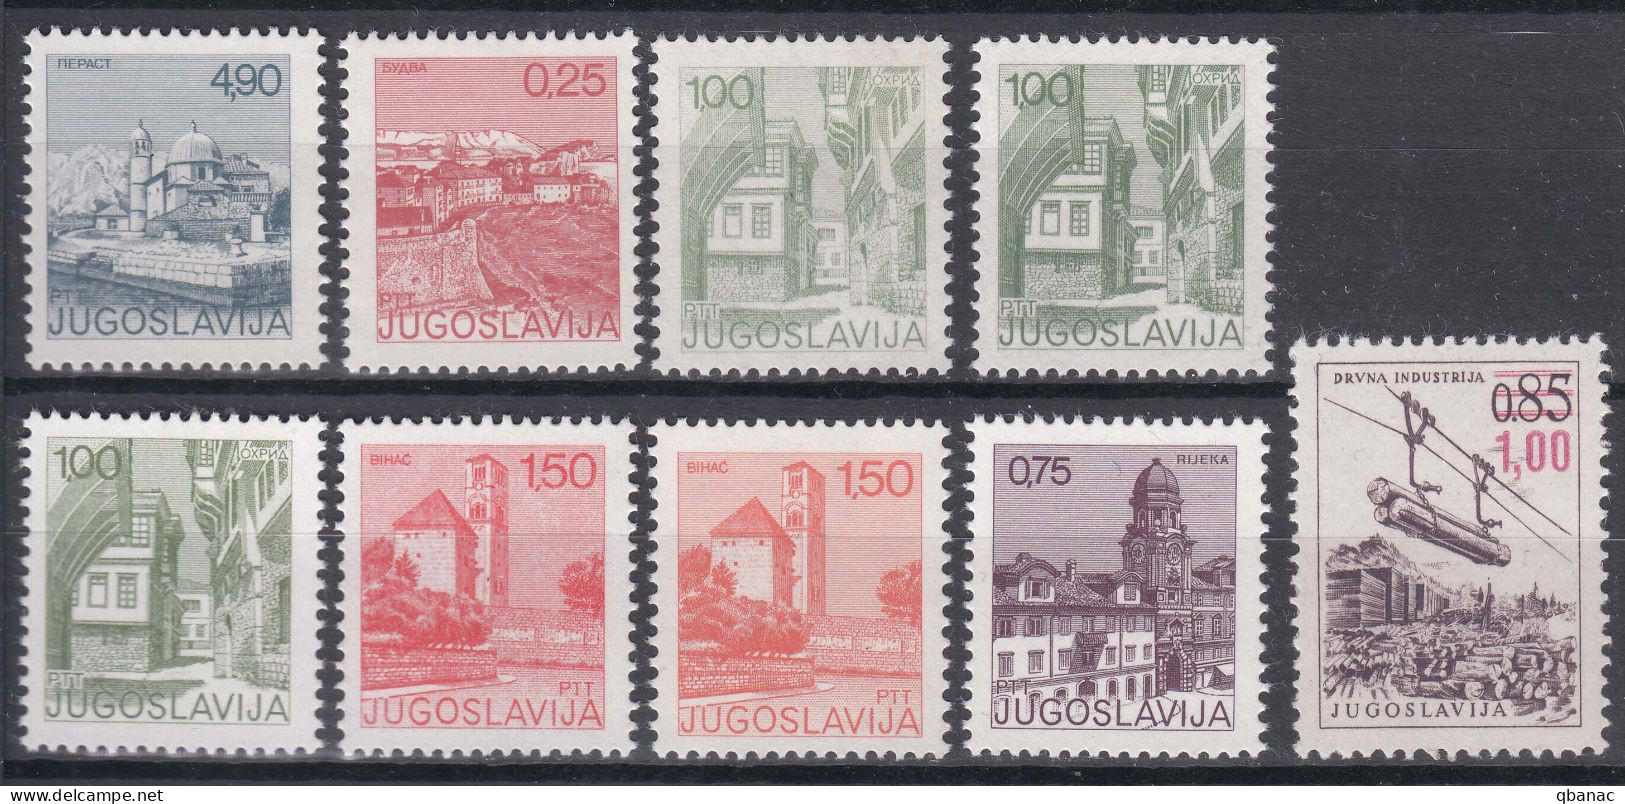 Yugoslavia Republic 1976 Complete Definitive Stamps With Some Variations, Mint Never Hinged - Unused Stamps